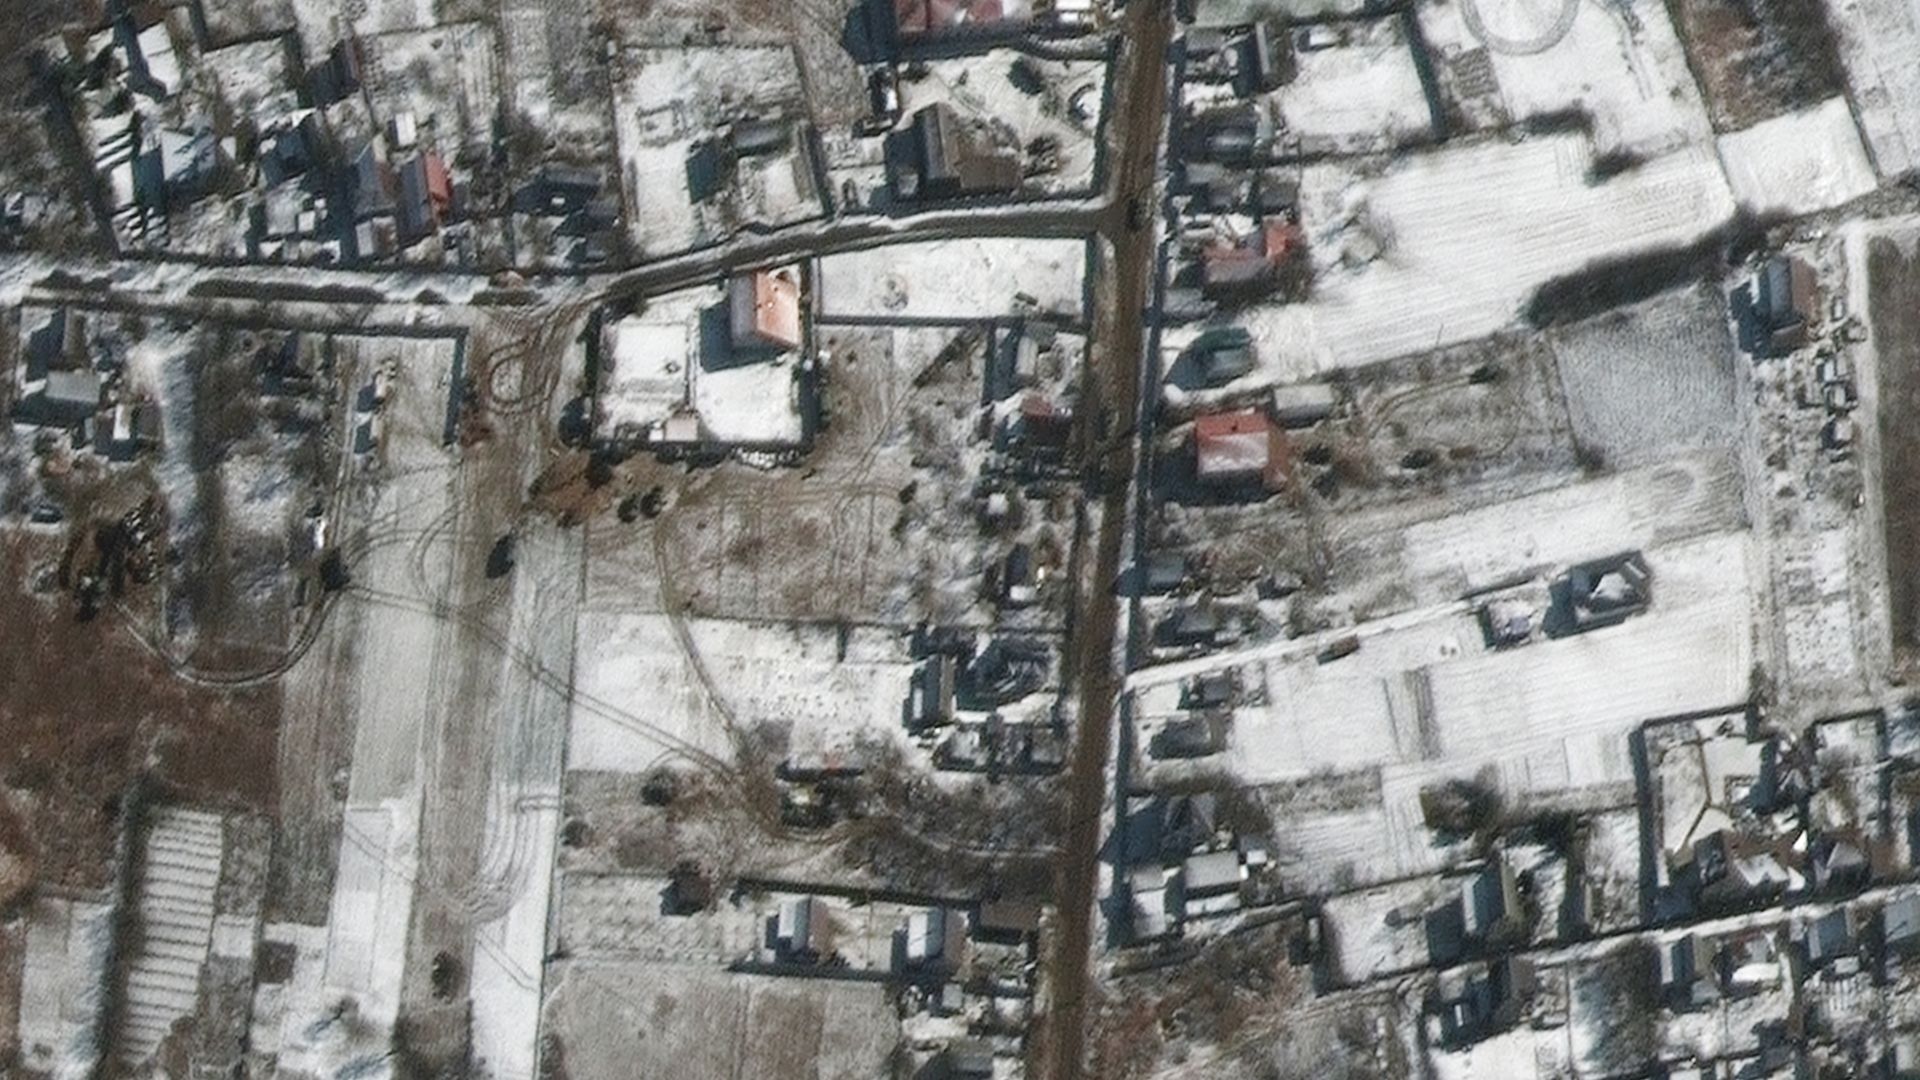 Russian military vehicles are seen sitting on roadways in residential areas in the town of Ozera, Ukraine, near Kyiv.